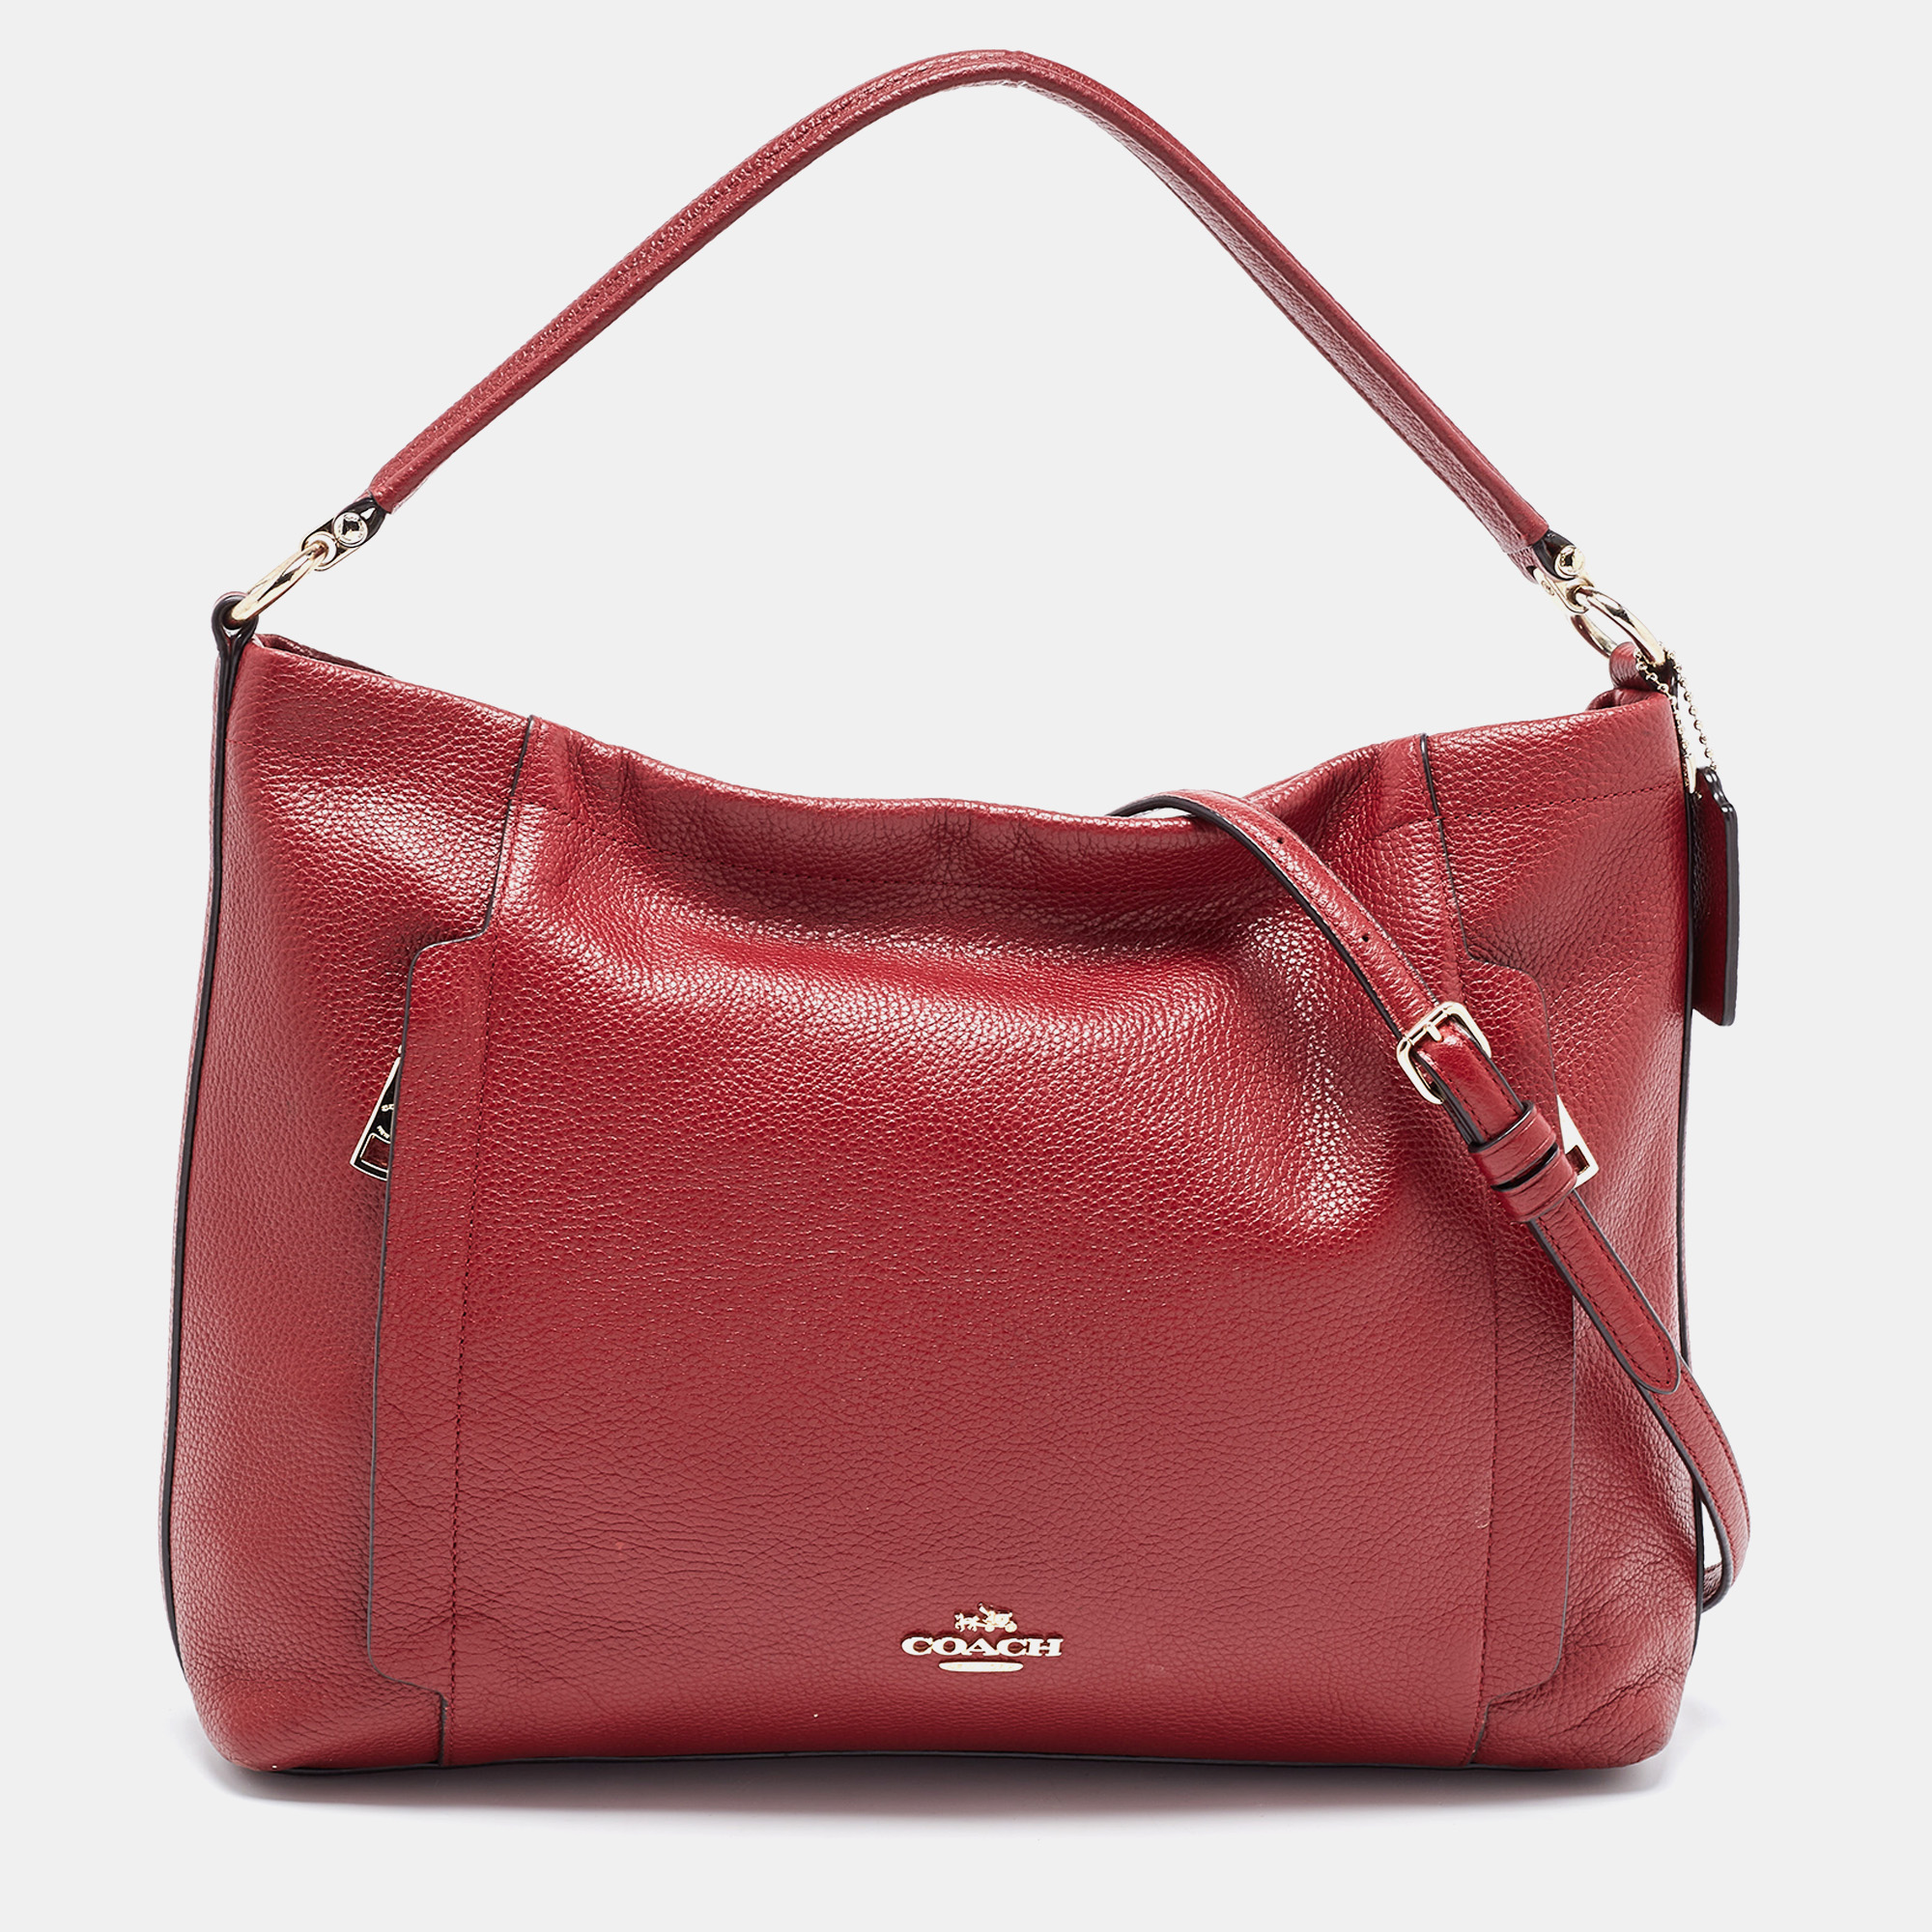 Coach red leather marlon hobo